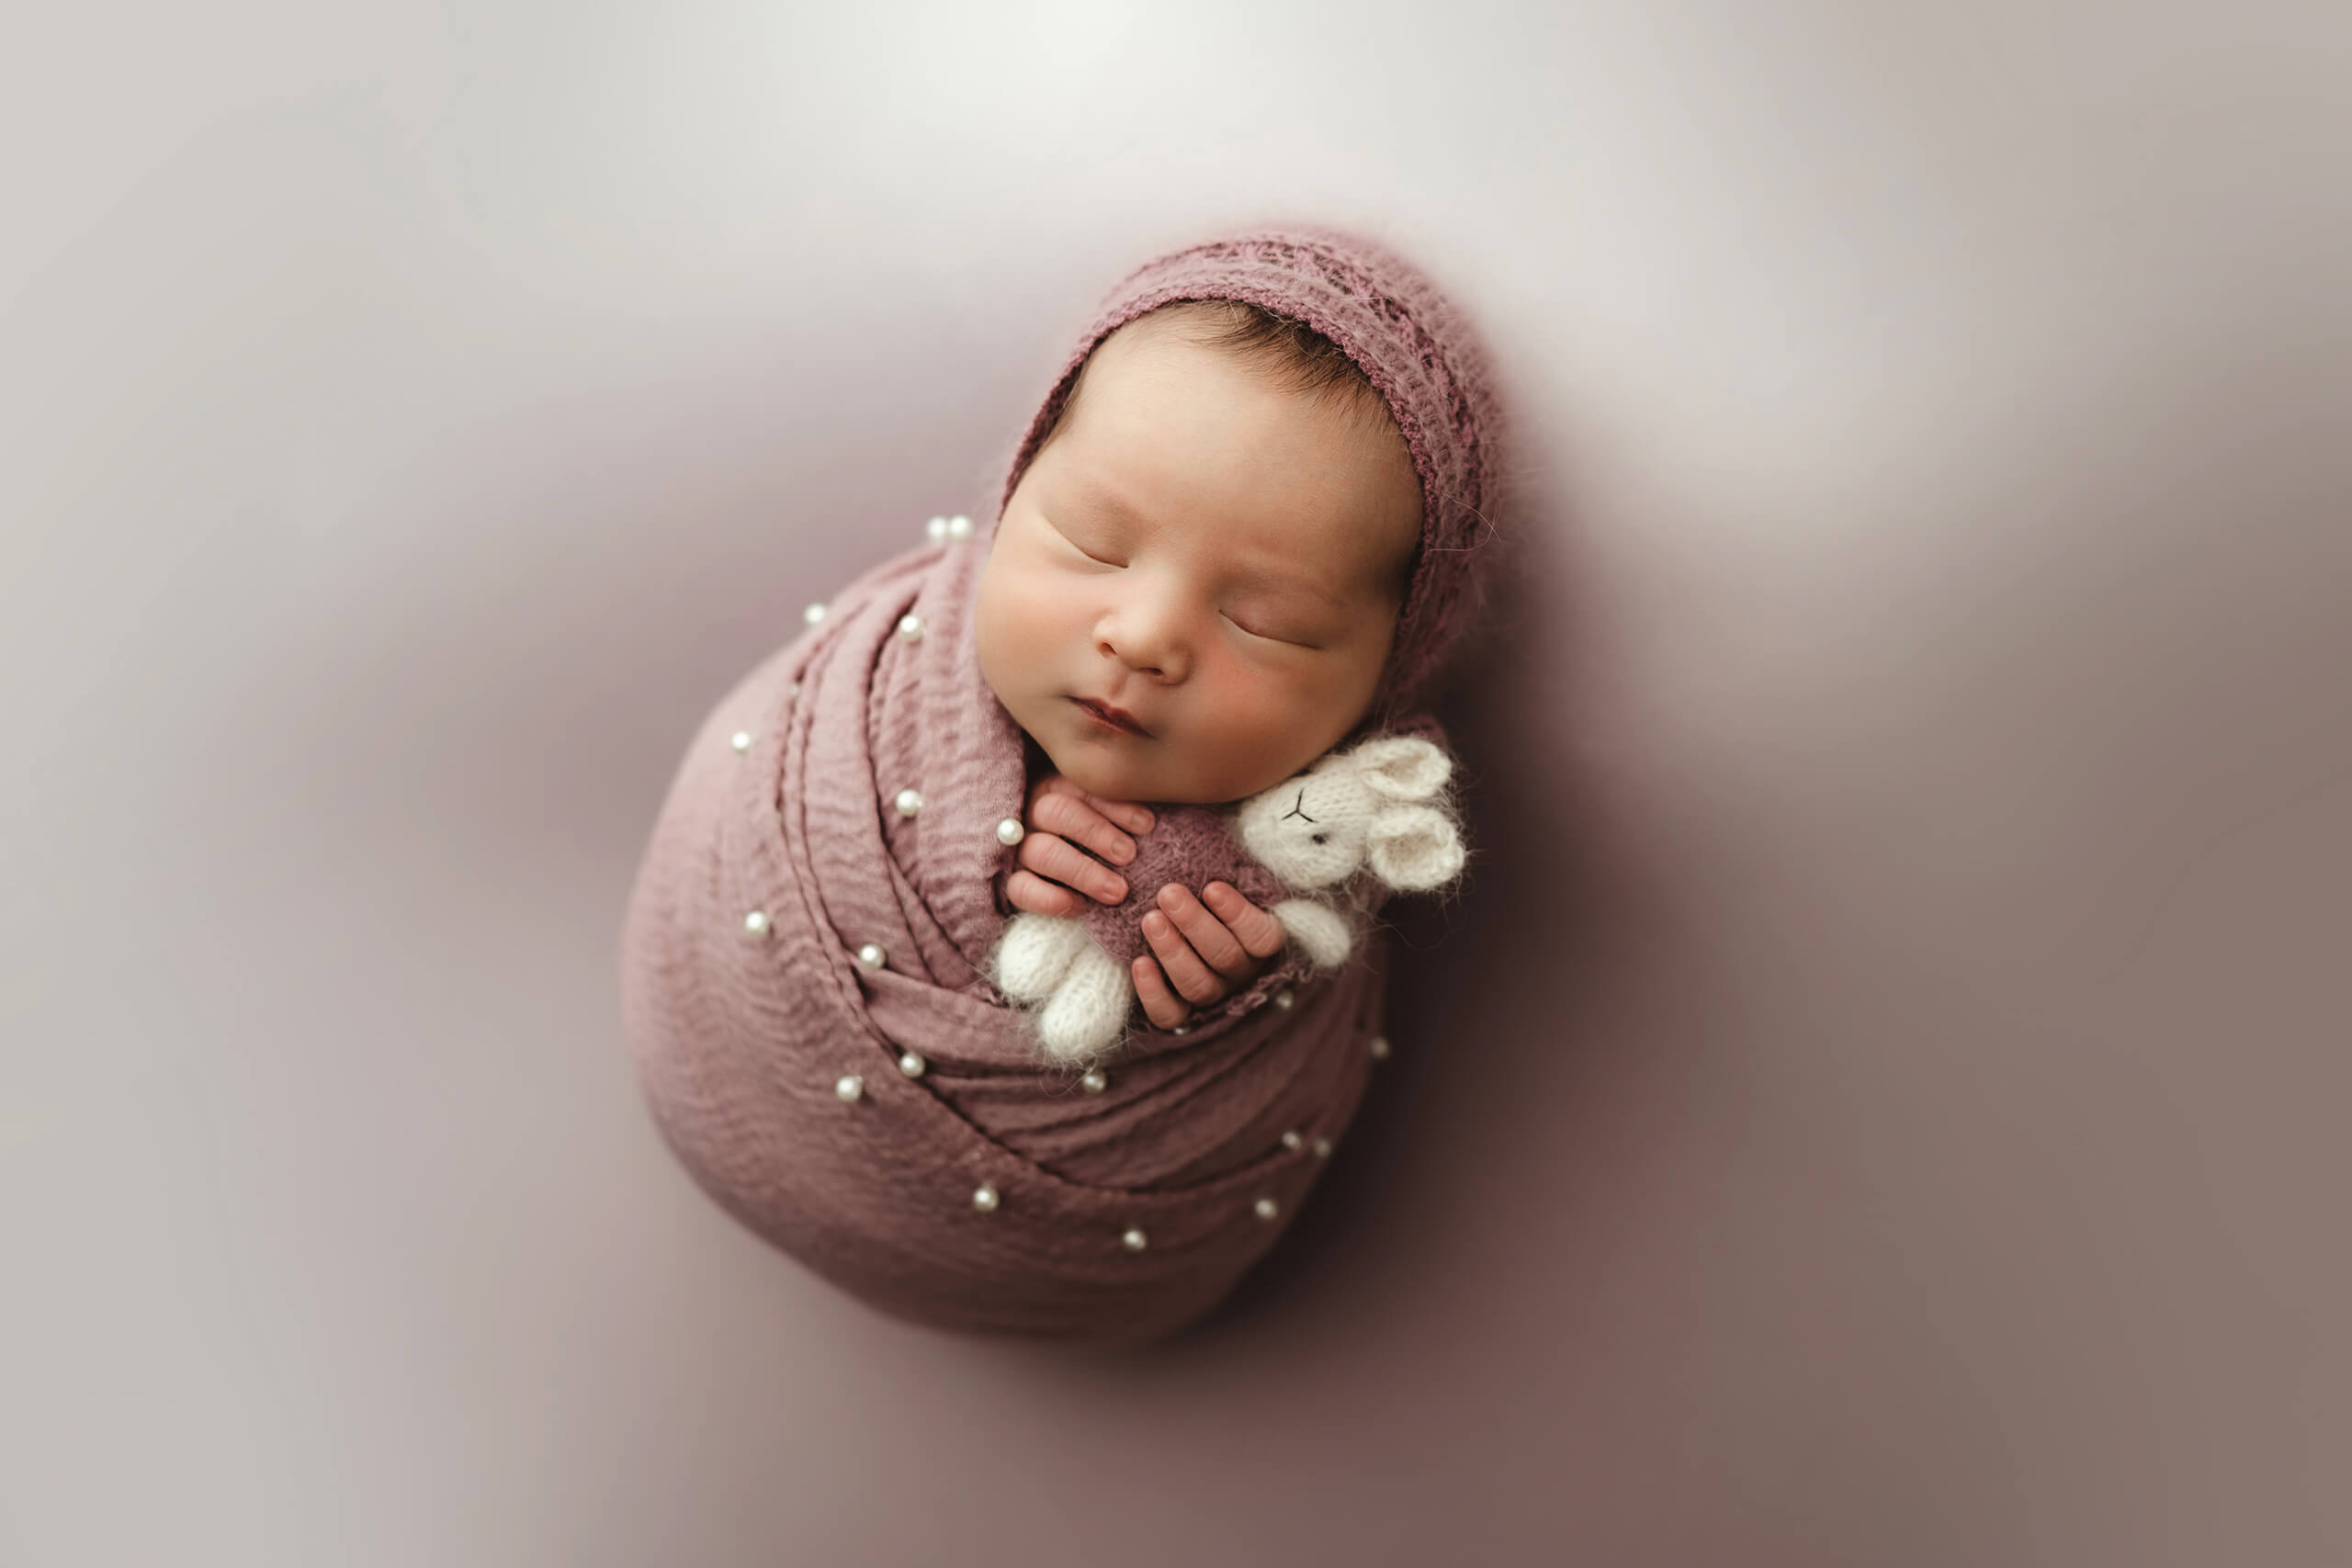 How to Order Custom Photo Albums from Your Family or Newborn Session, Newborn Photography Seattle